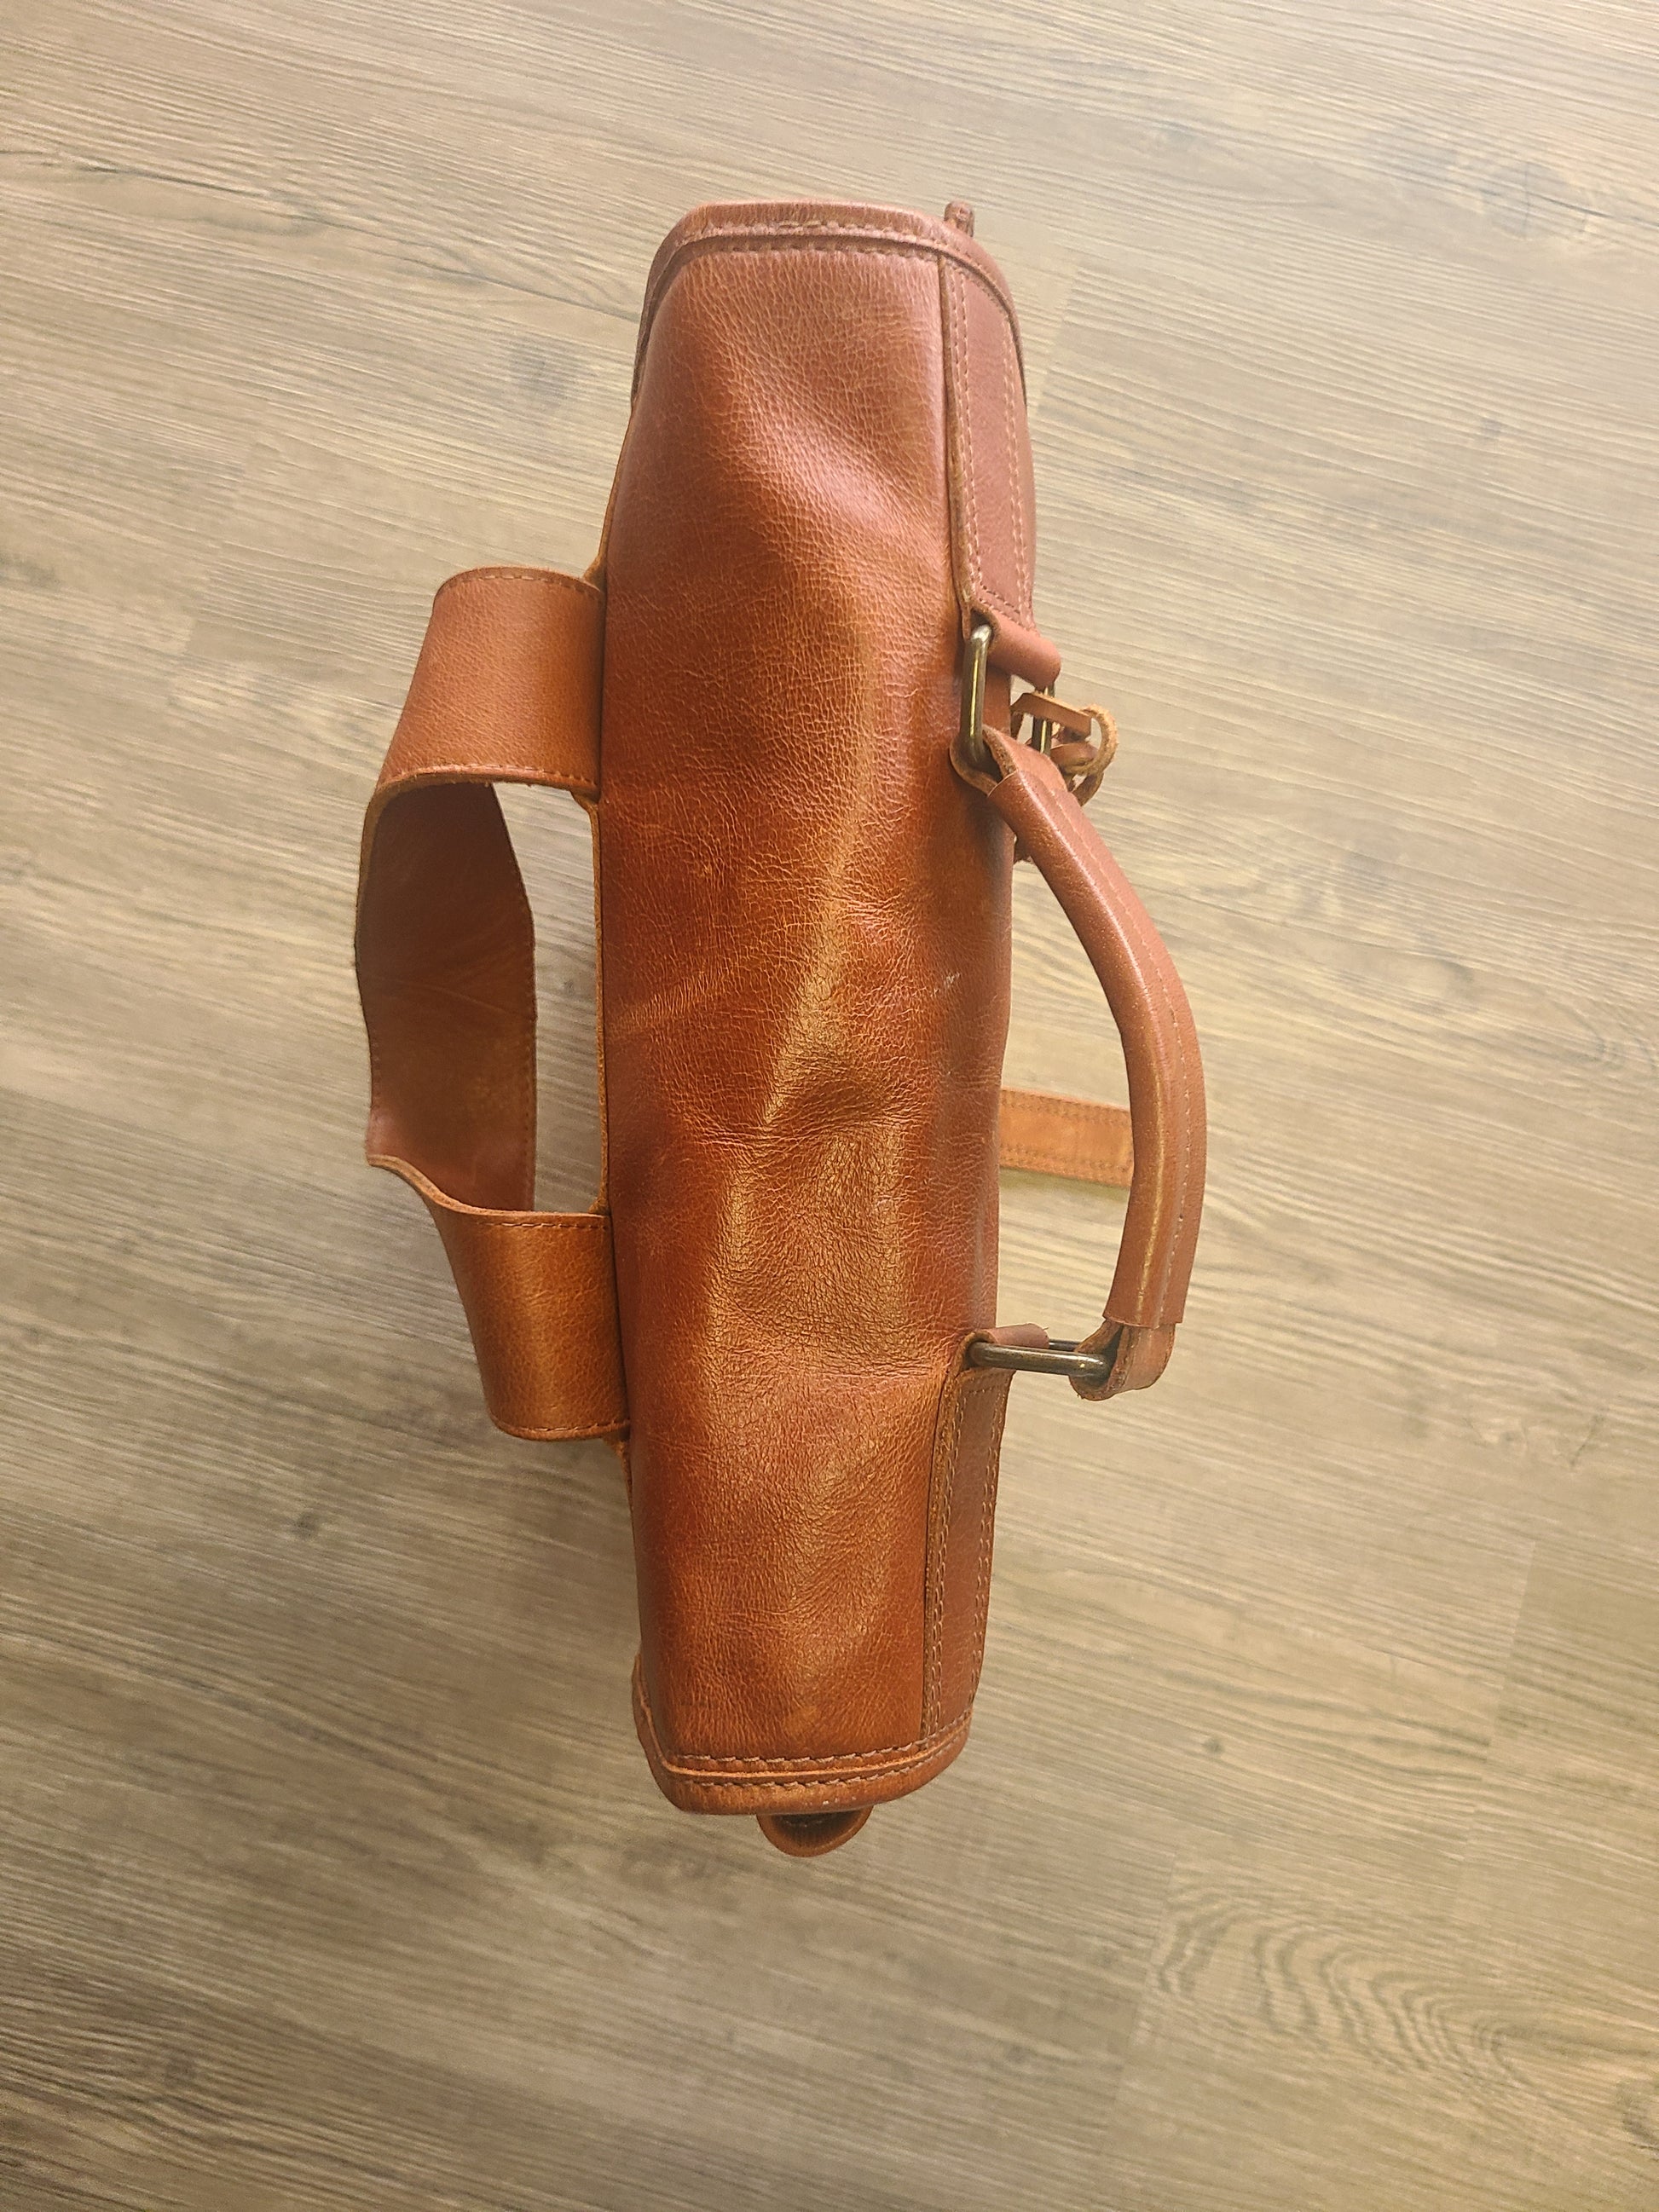 Leather Cowhide Travel Rucksack-Status Co. Leather Studio